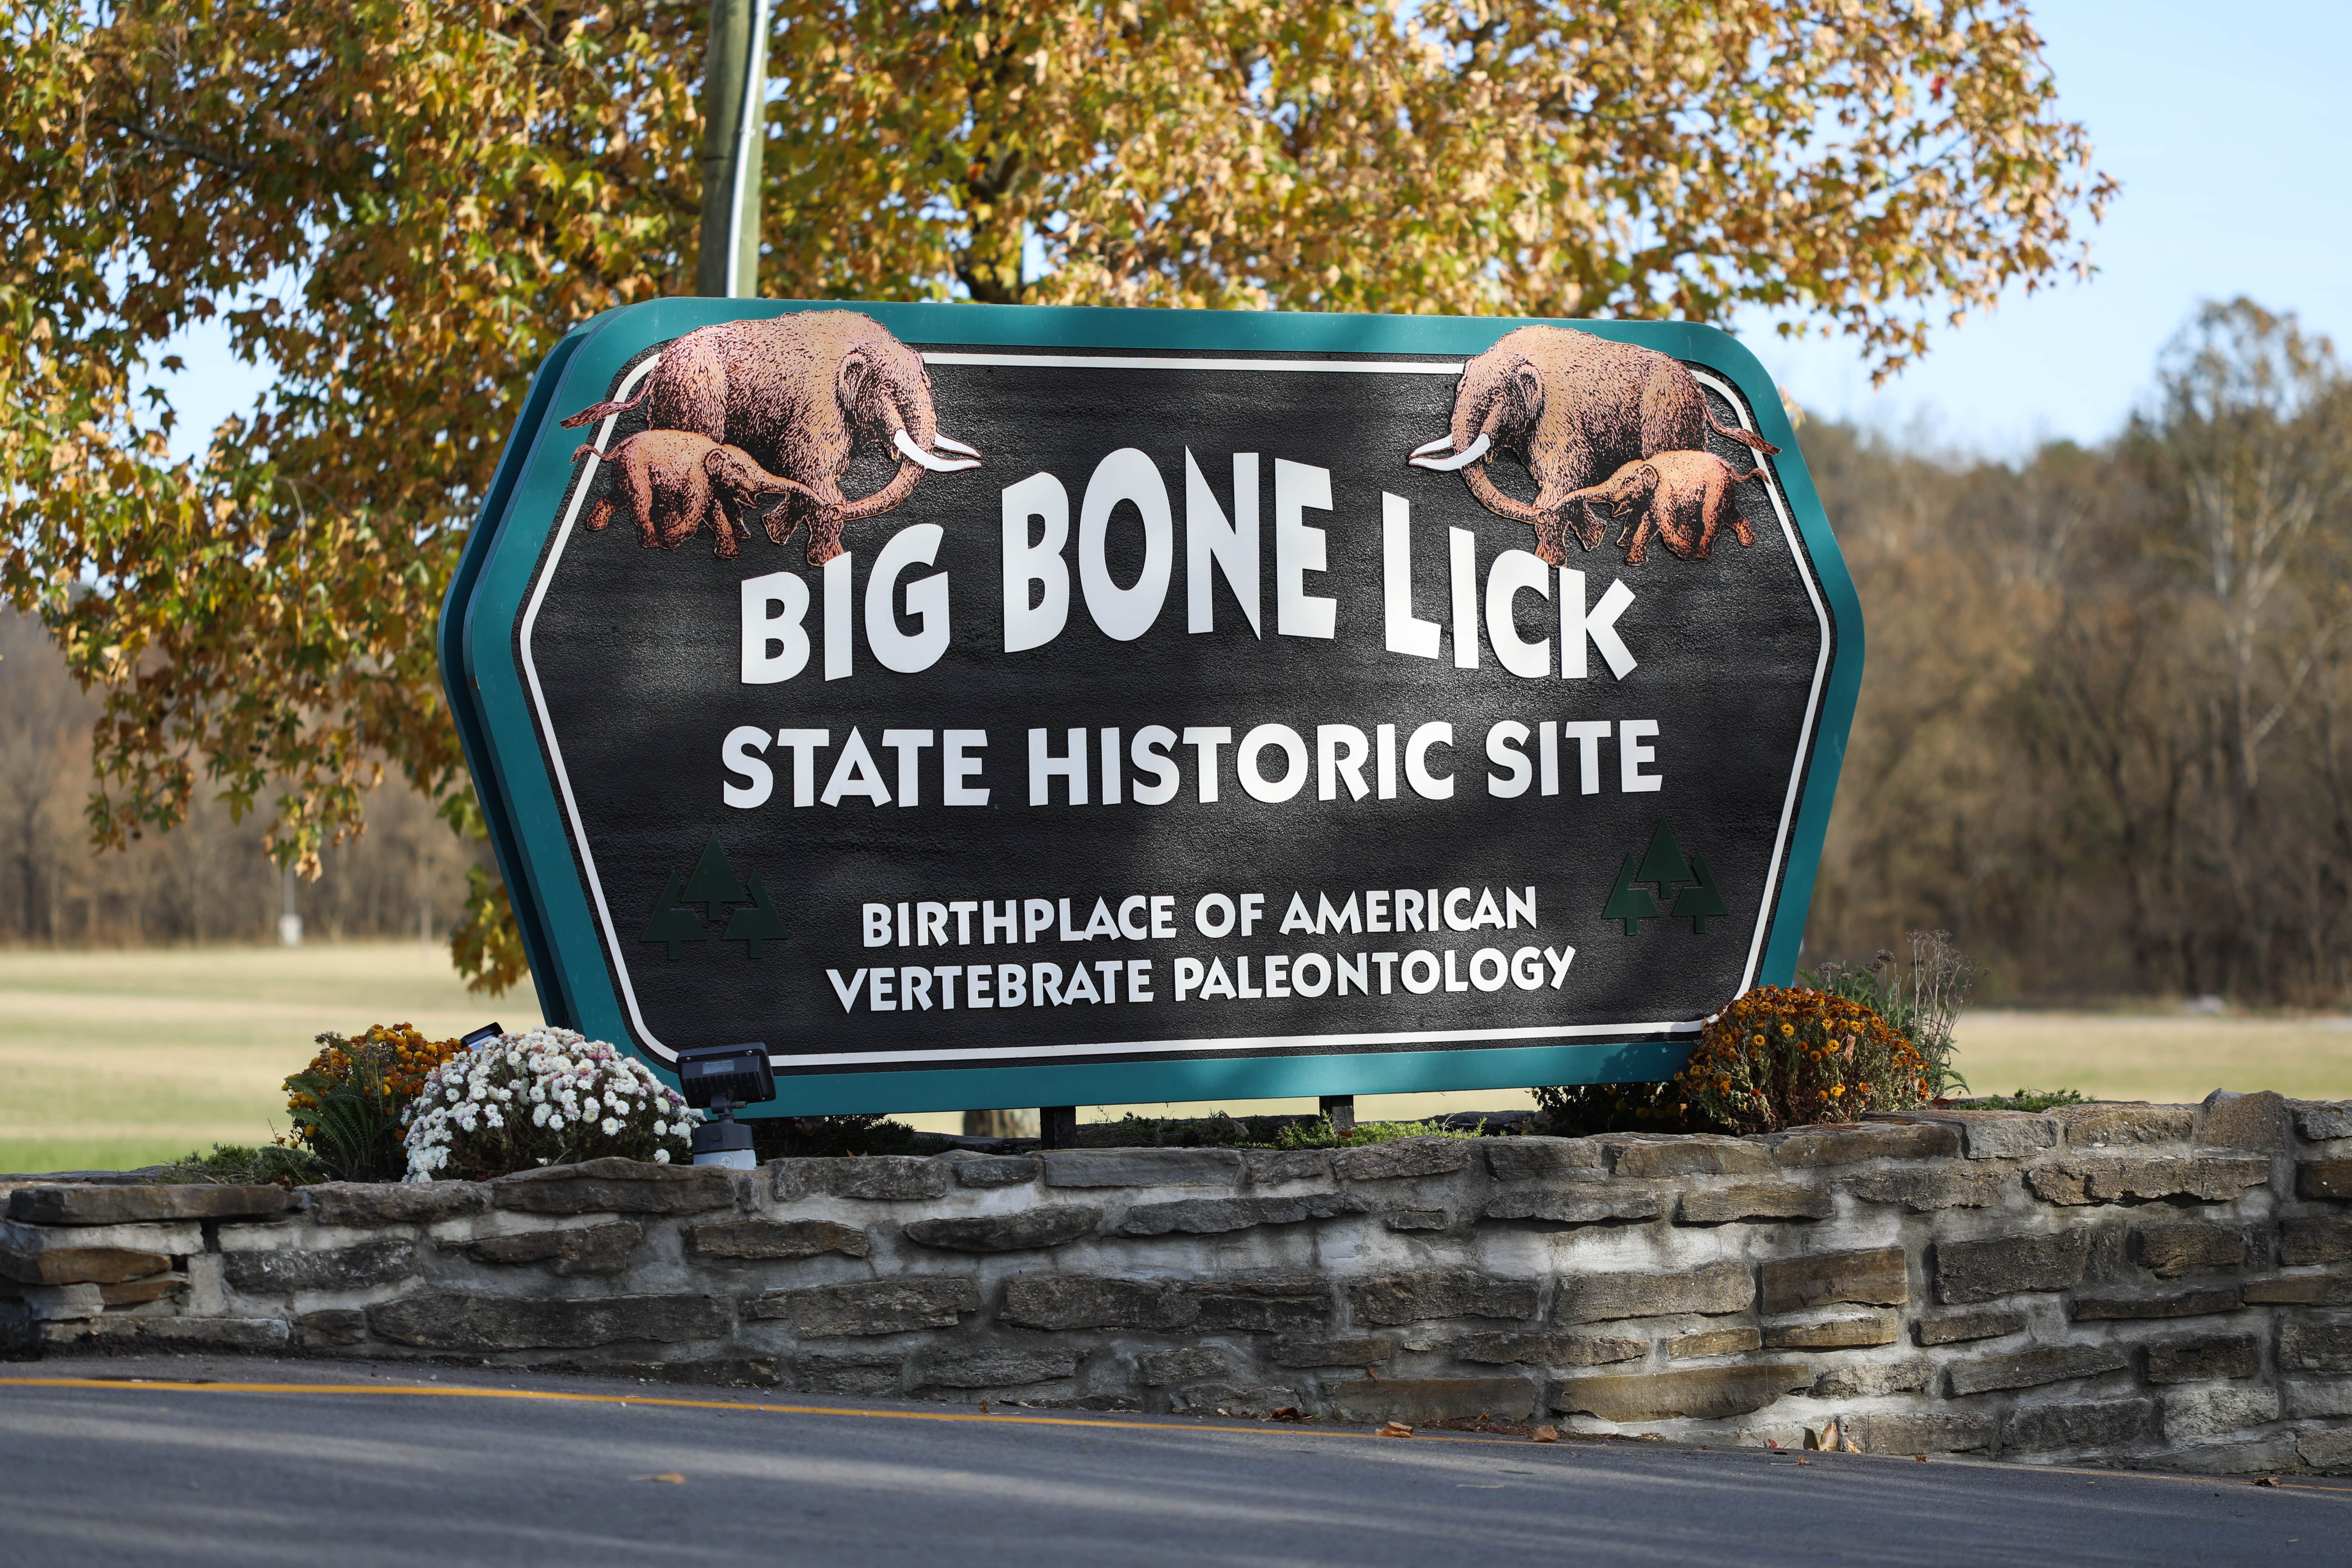 The entrance to Big Bone Lick State Historic Site 